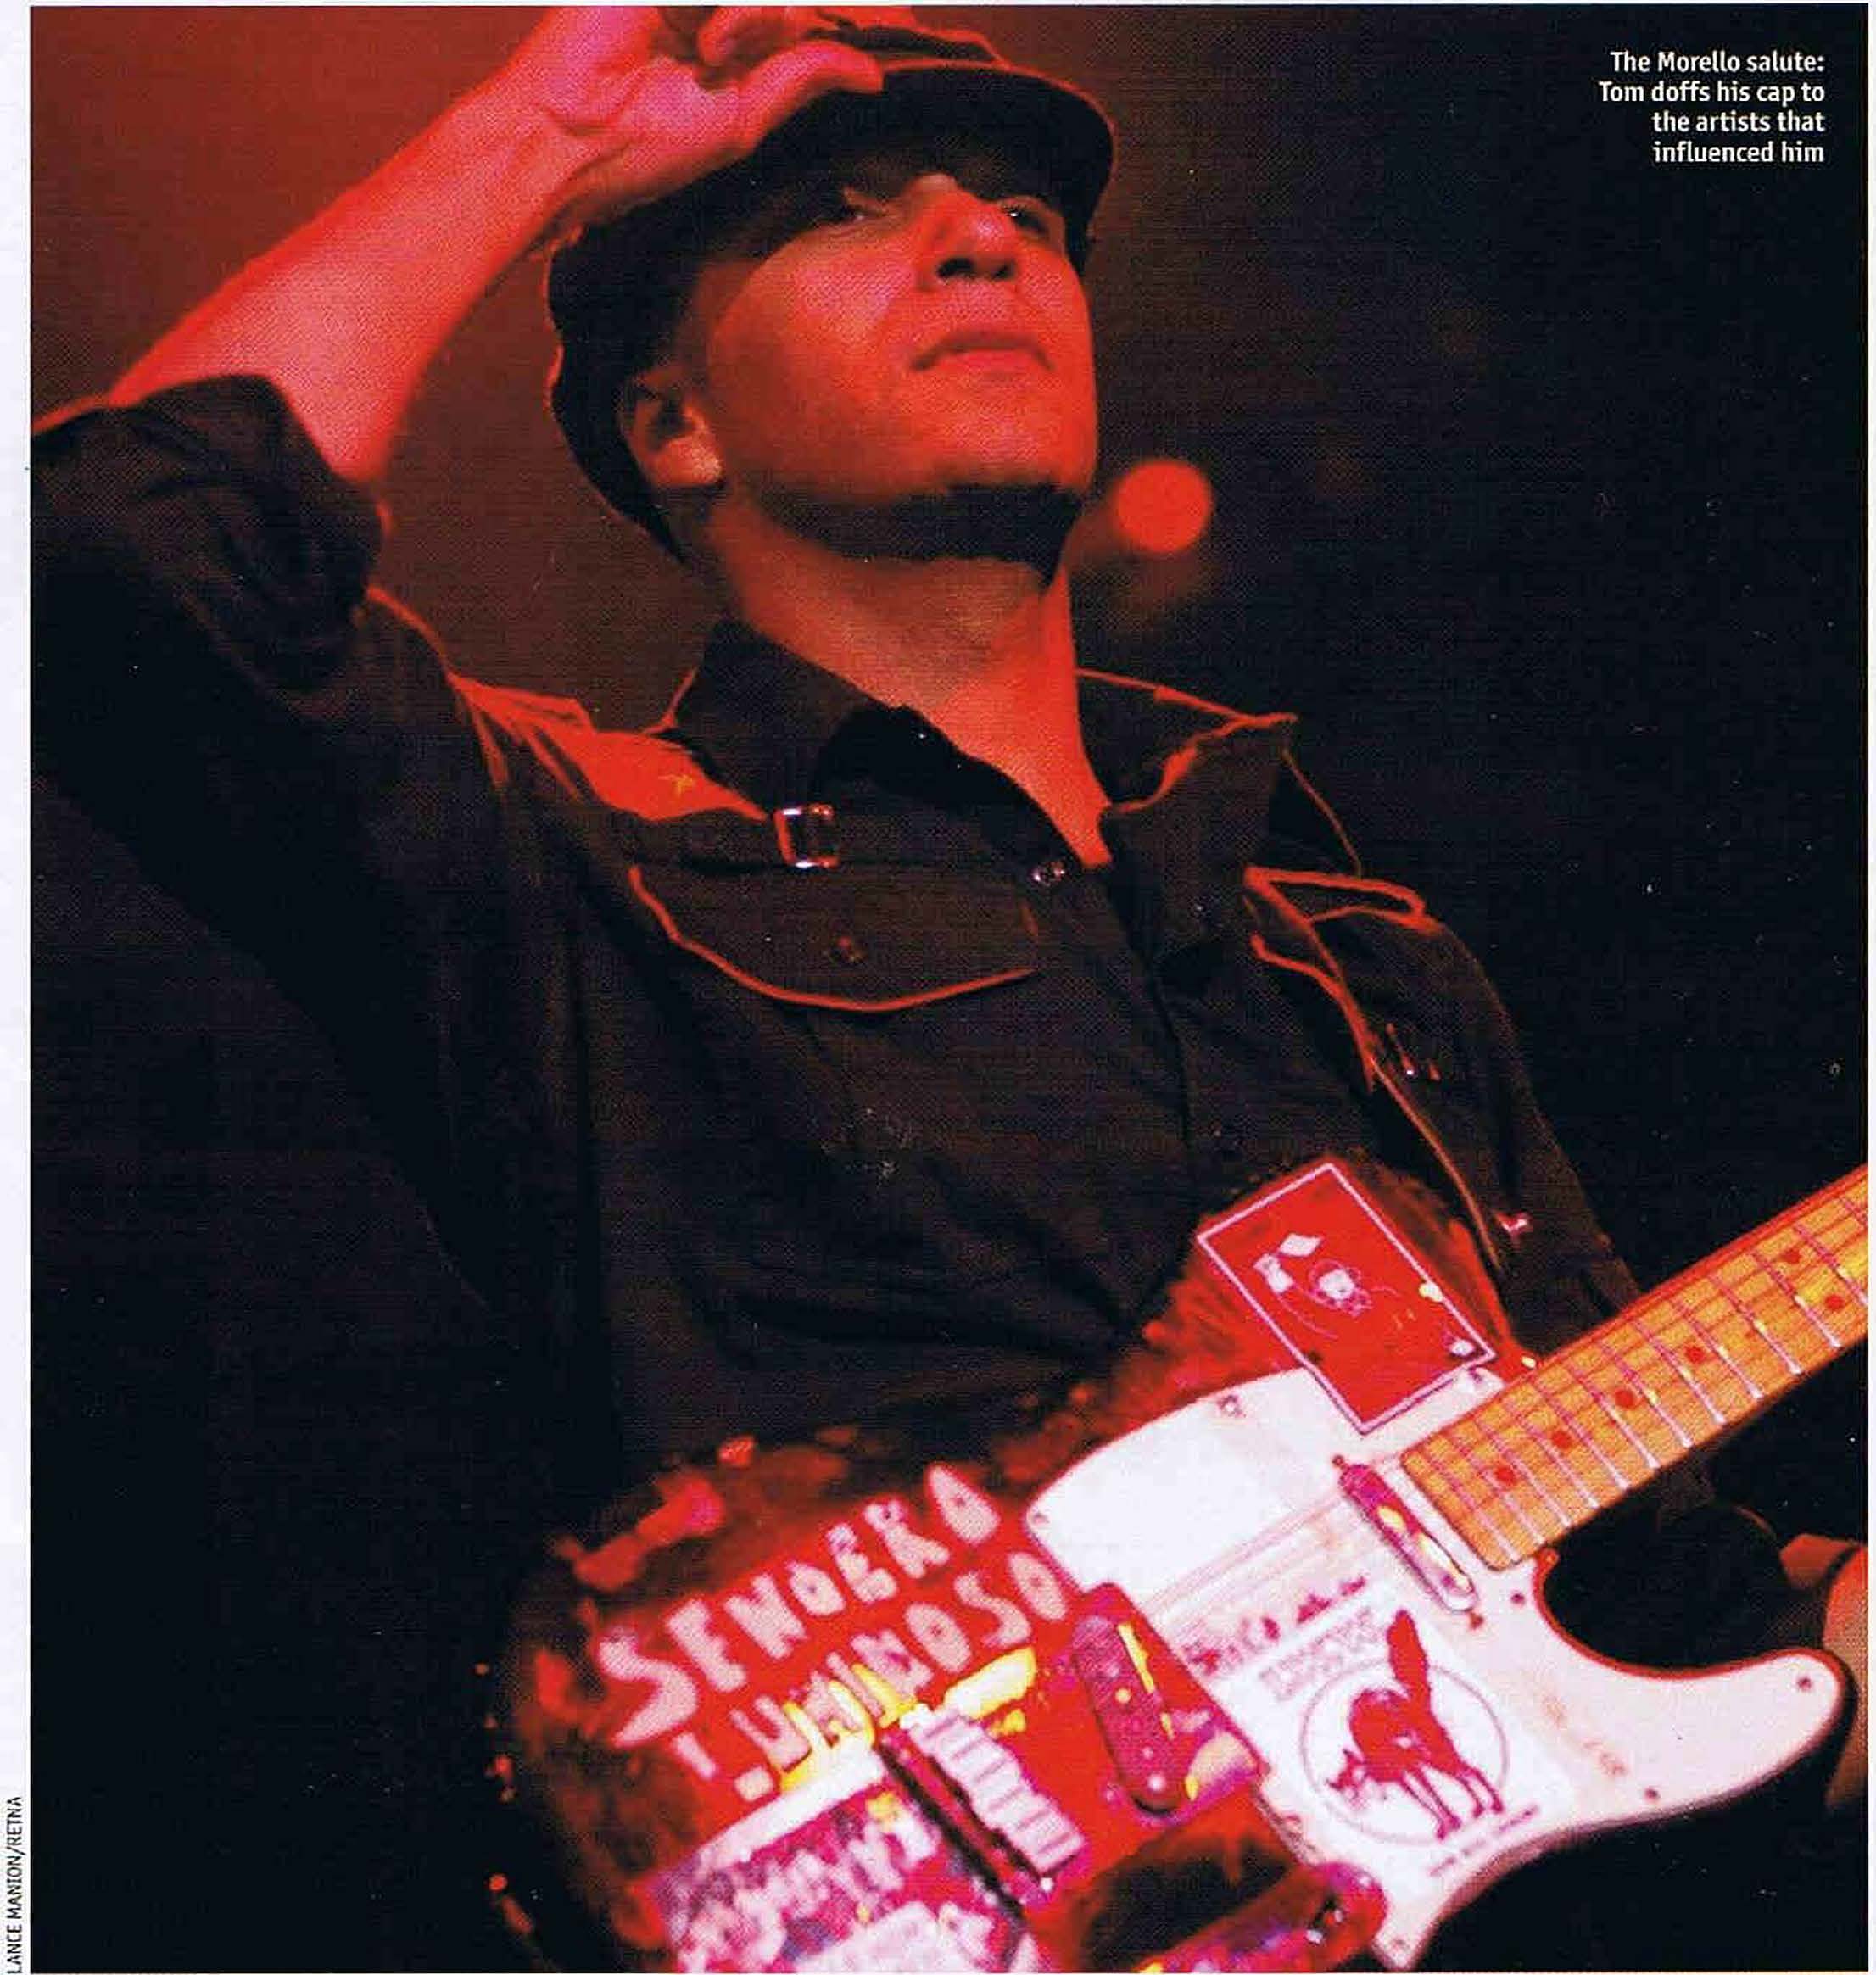 Tom Morello, Reveals His Guitar Inspirations And Heroes